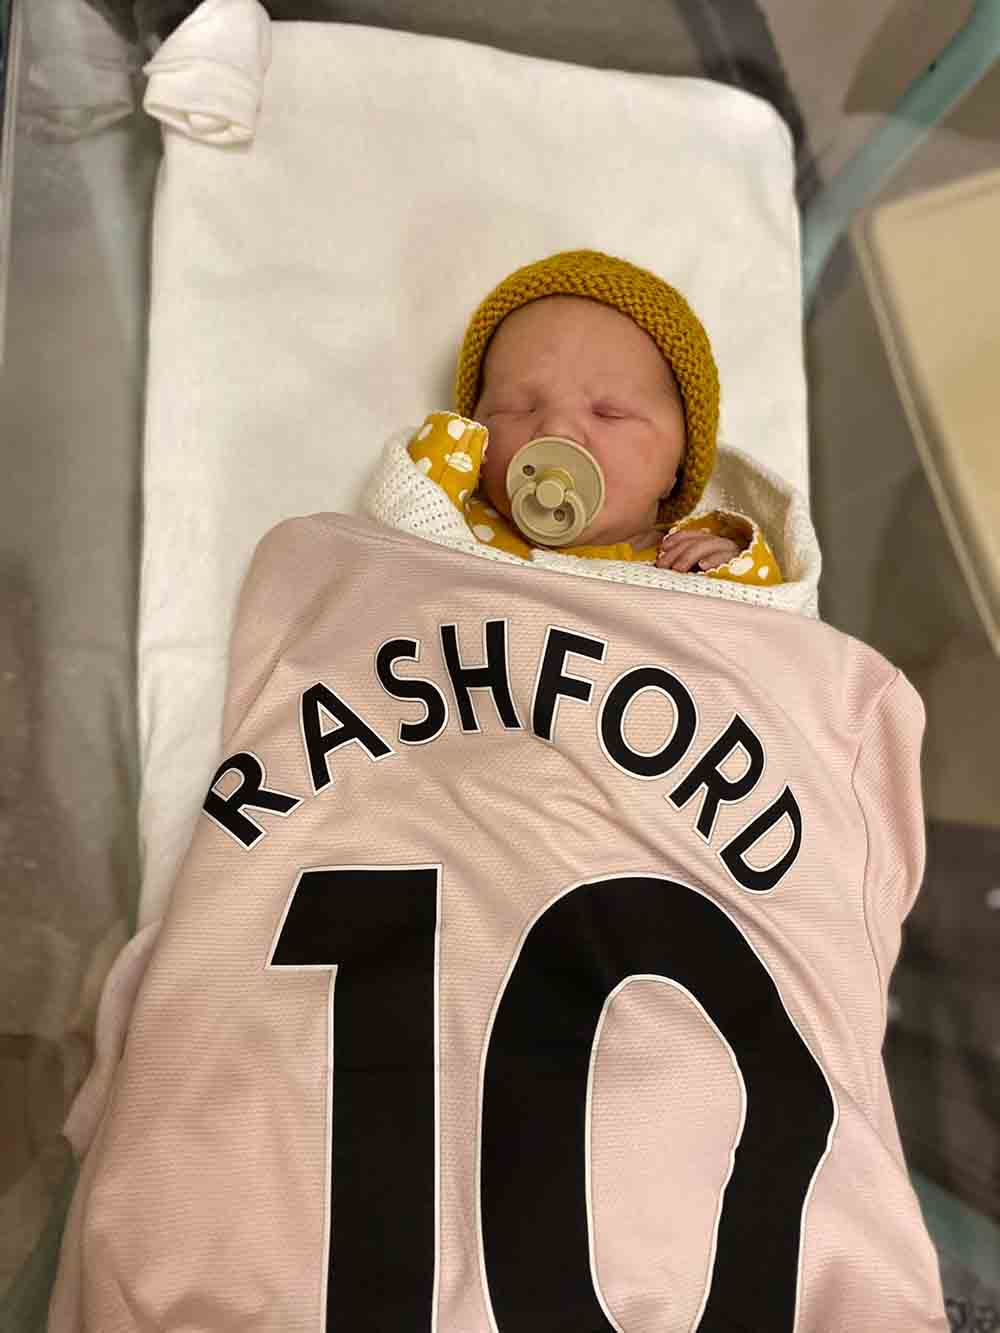 Young Dad shares details of epic night which saw his daughter born and Manchester United win - Viral News UK